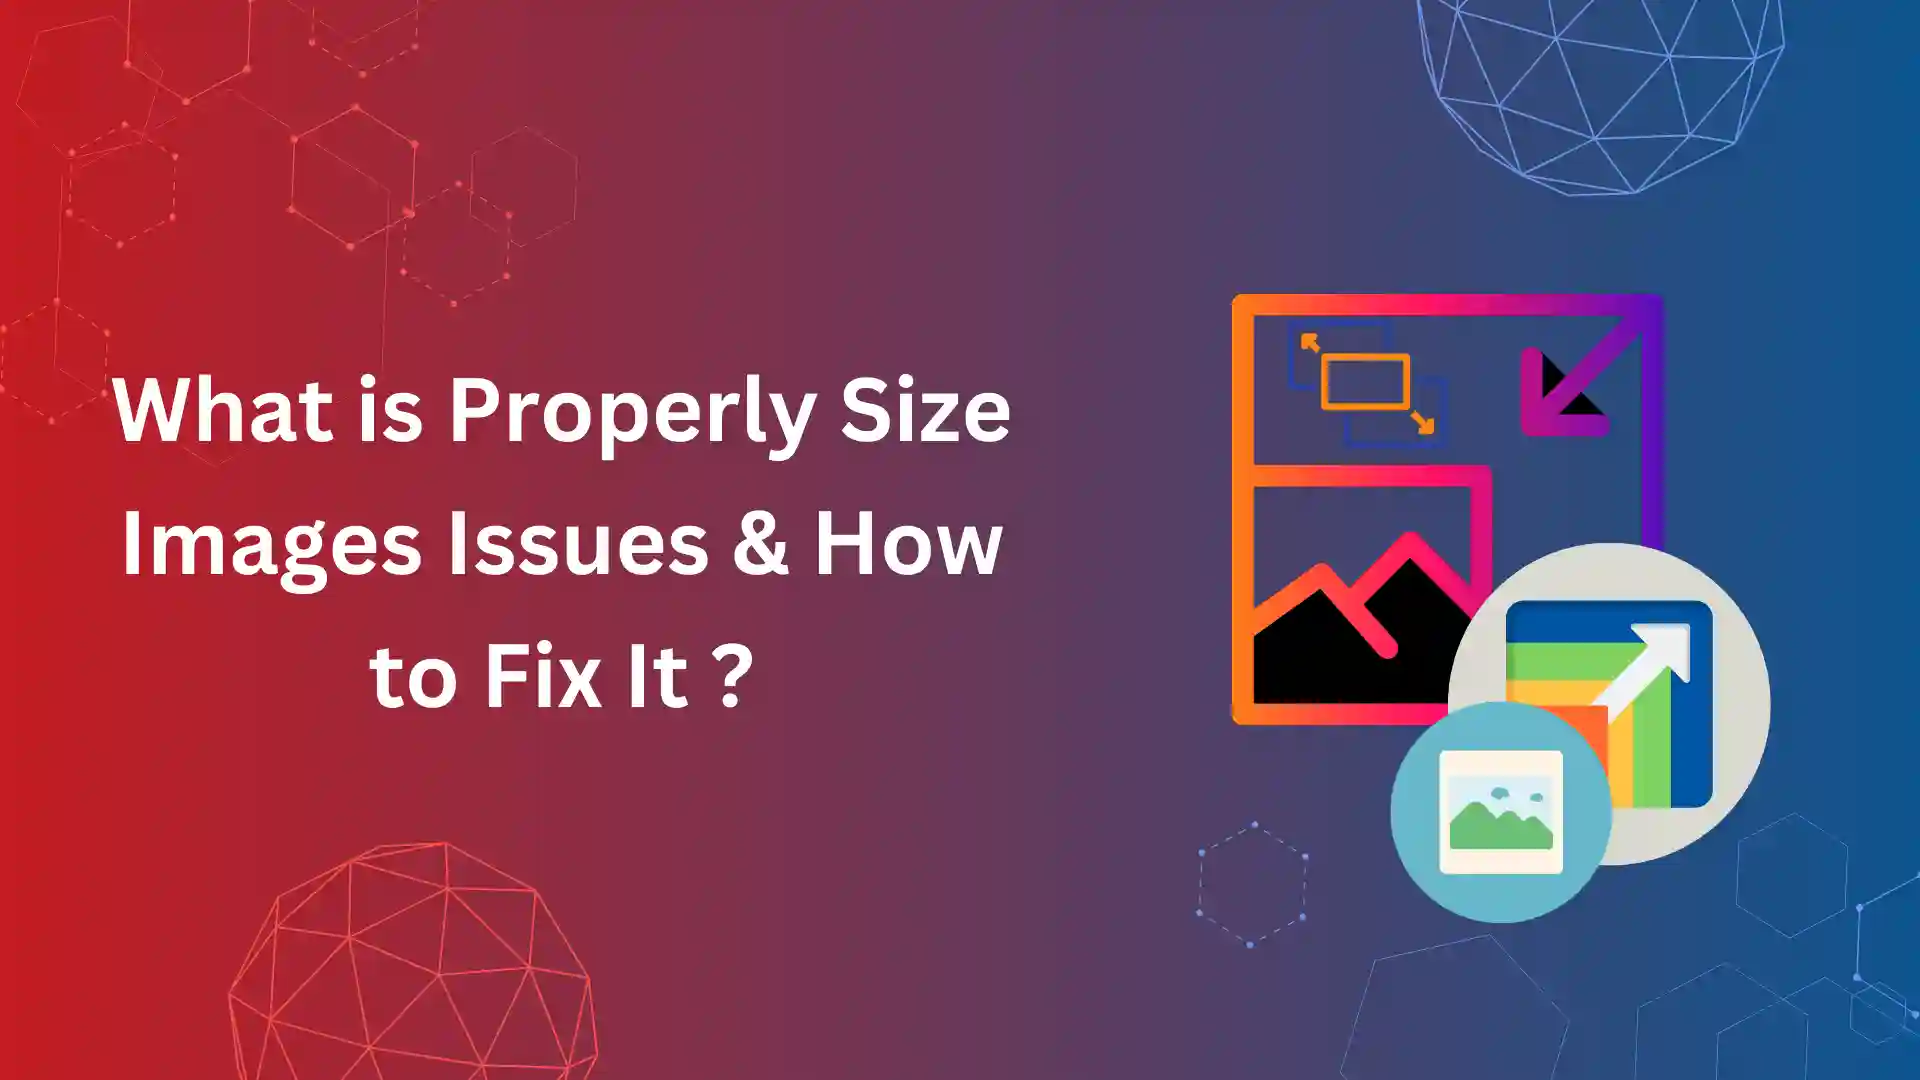 What is Properly Size Images Issues & How to Fix It